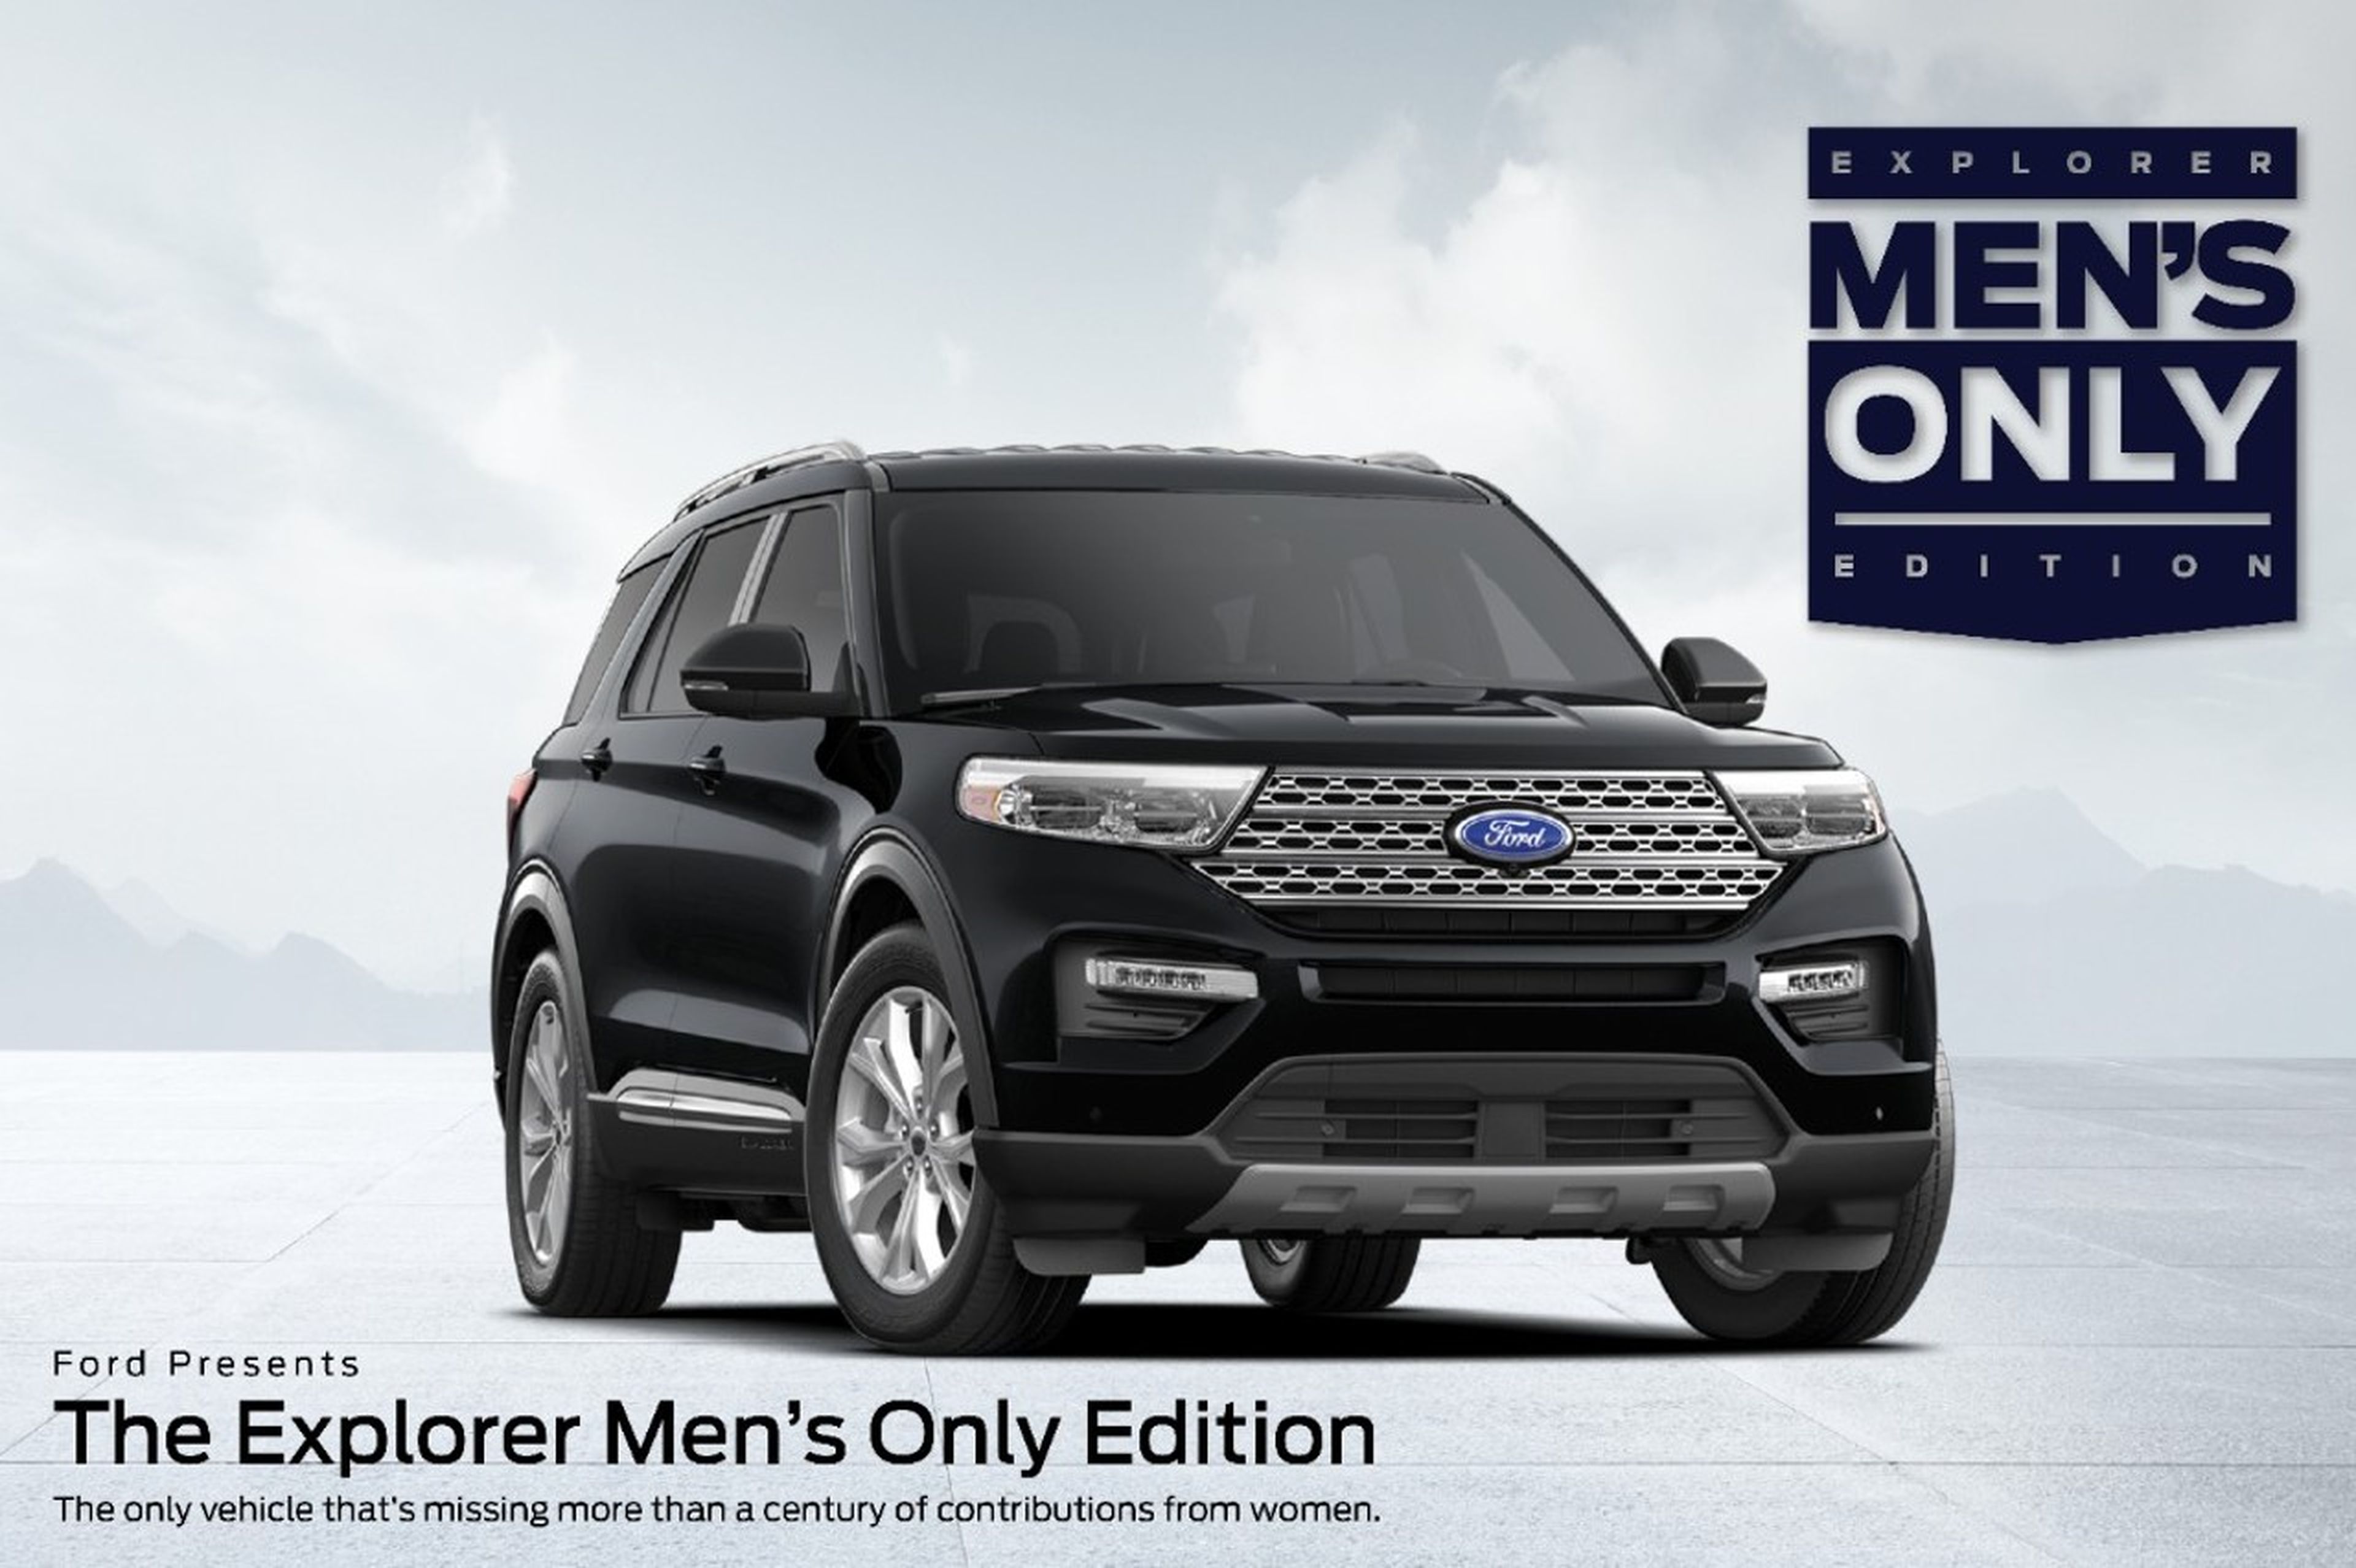 Ford Explore Men’s Only Edition